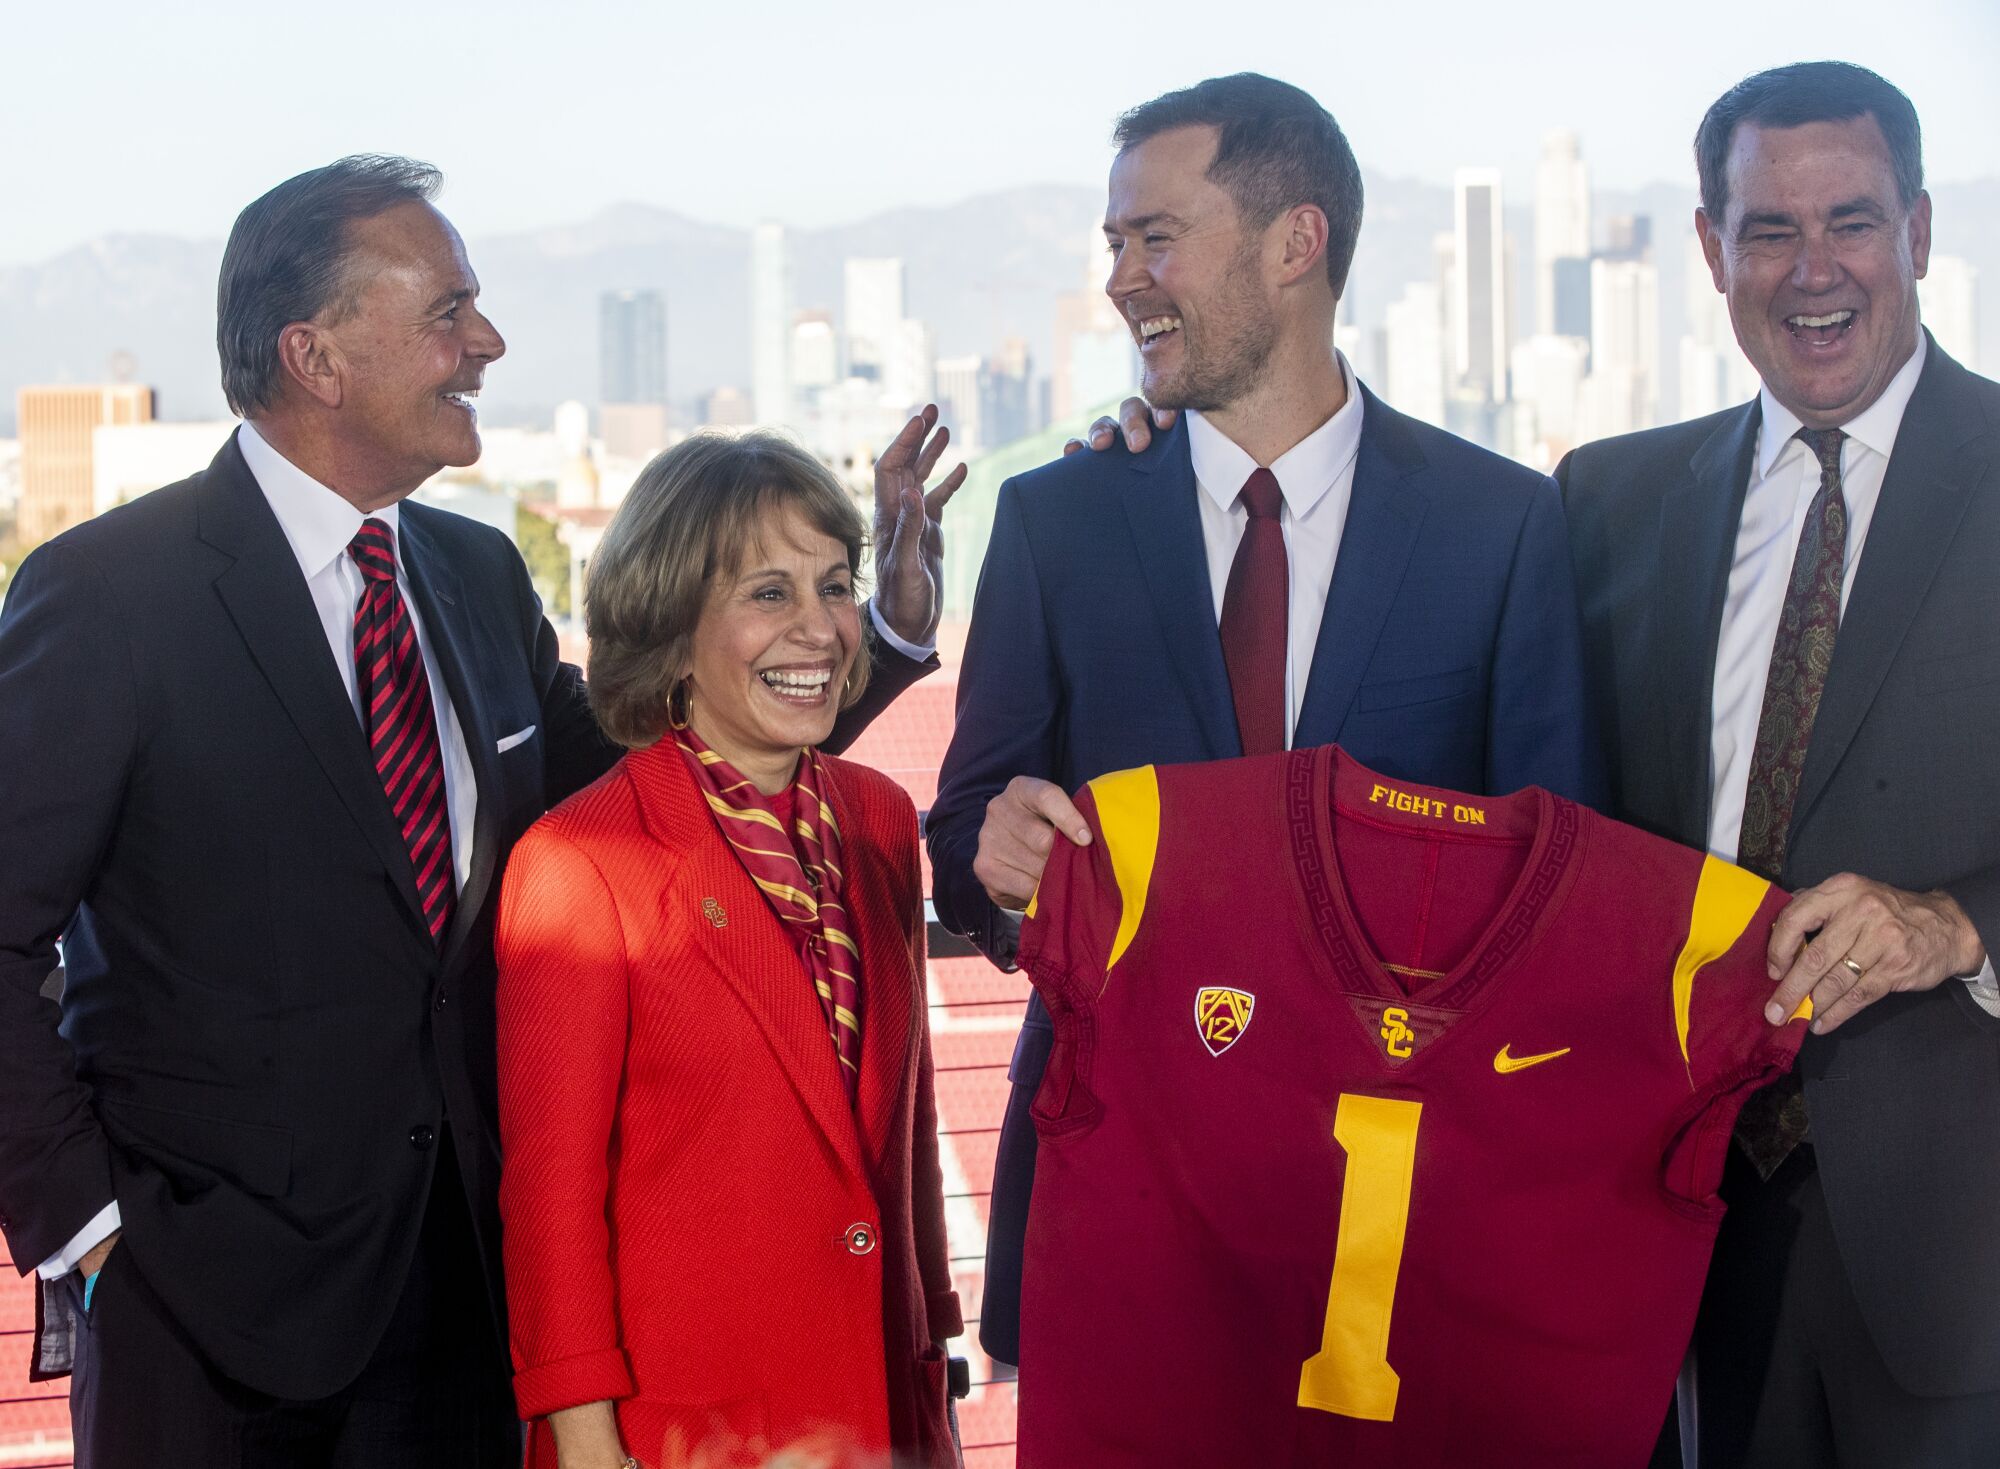 From left Rick Caruso, Carol L. Folt, new USC coach, Lincoln Riley, and Mike Bohn.